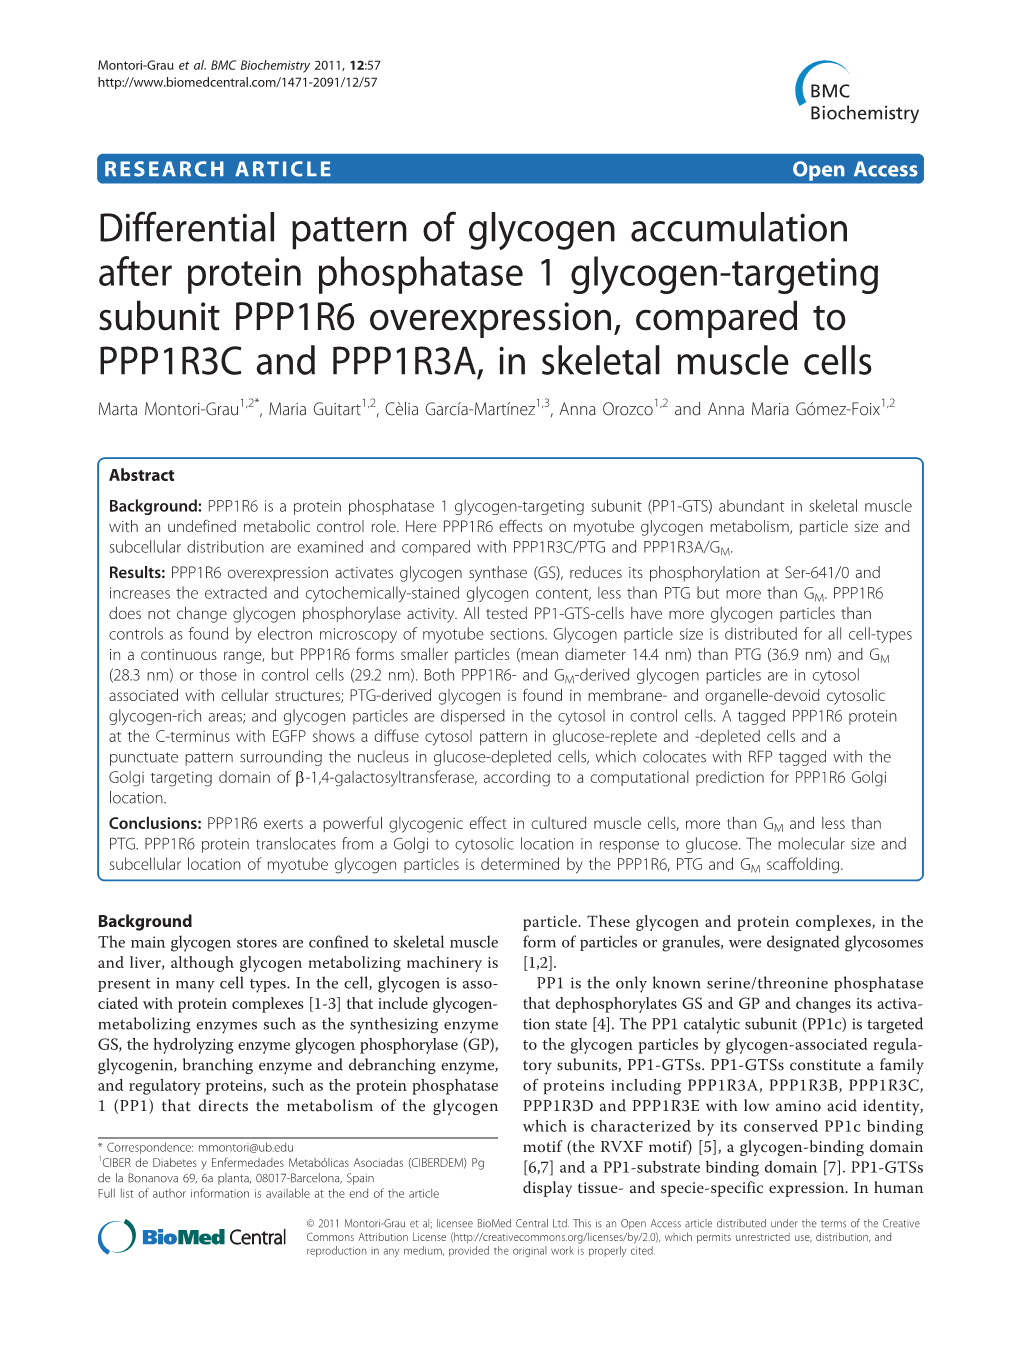 Differential Pattern of Glycogen Accumulation